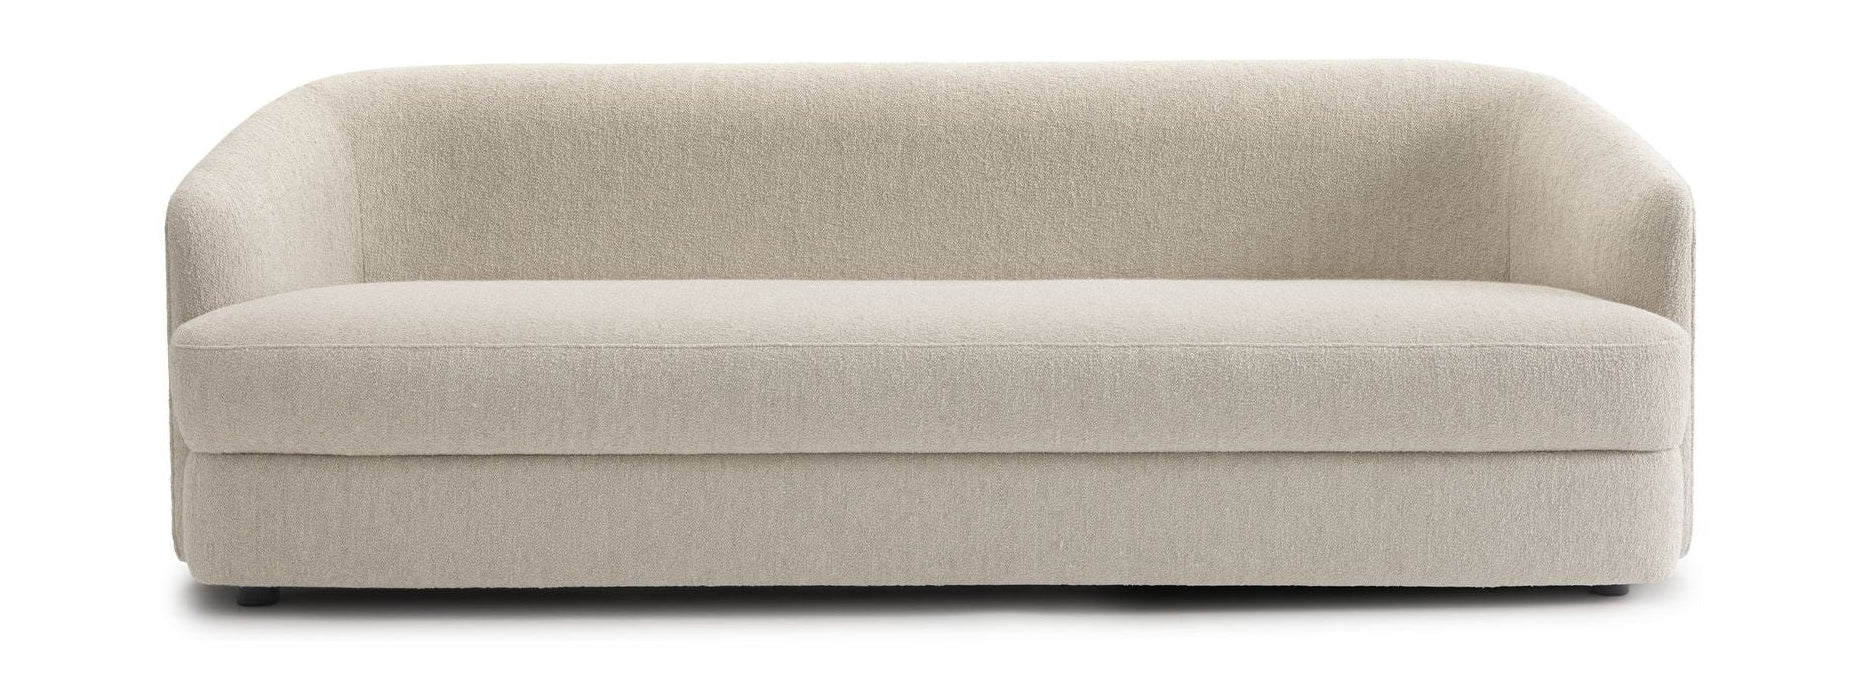 New Works Covent Sofa 3 Seater, Lana